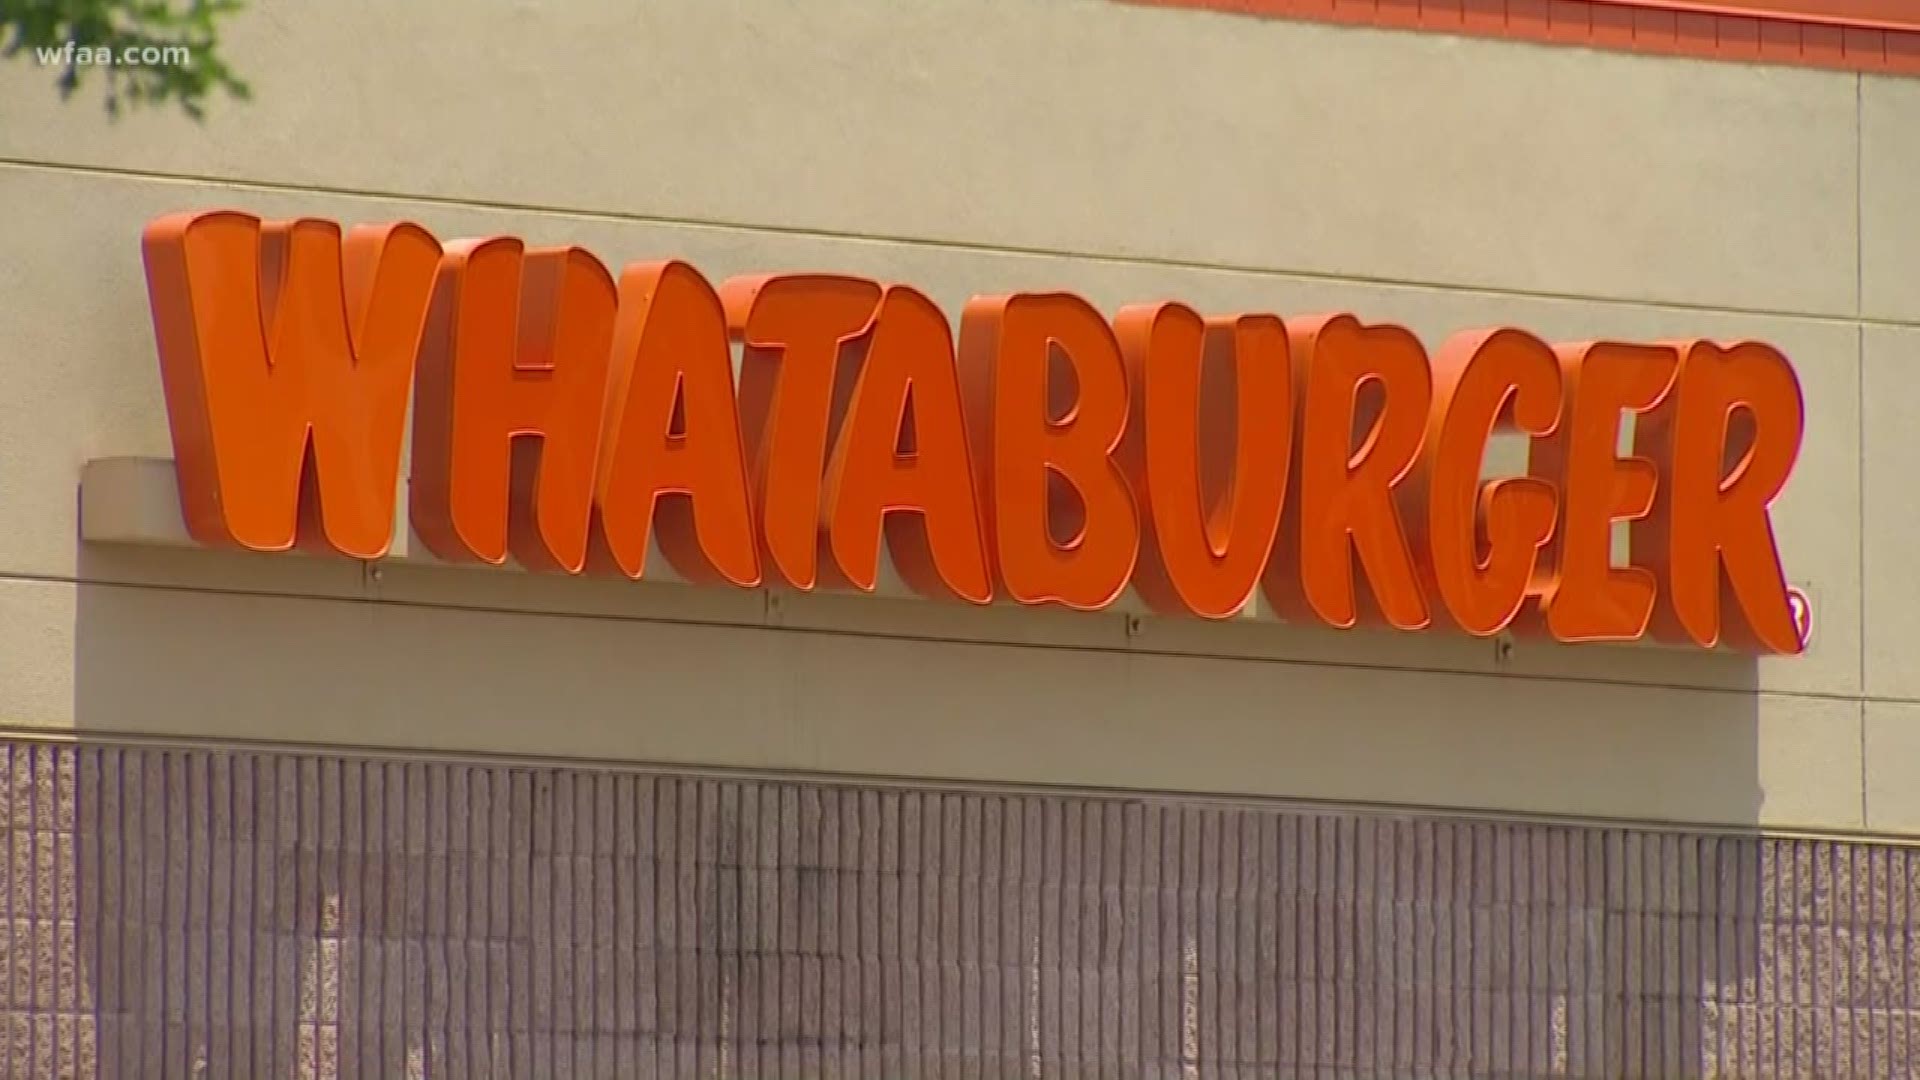 Now that a Chicago-based merchant banking company, BDT Capital Partners, has acquired a majority interest in Whataburger, some loyal fans of the Texas fast food restaurant worry the flavor will change. Business experts say the sale likely means Whataburger will expand beyond a regional chain, much like In-N-Out has.